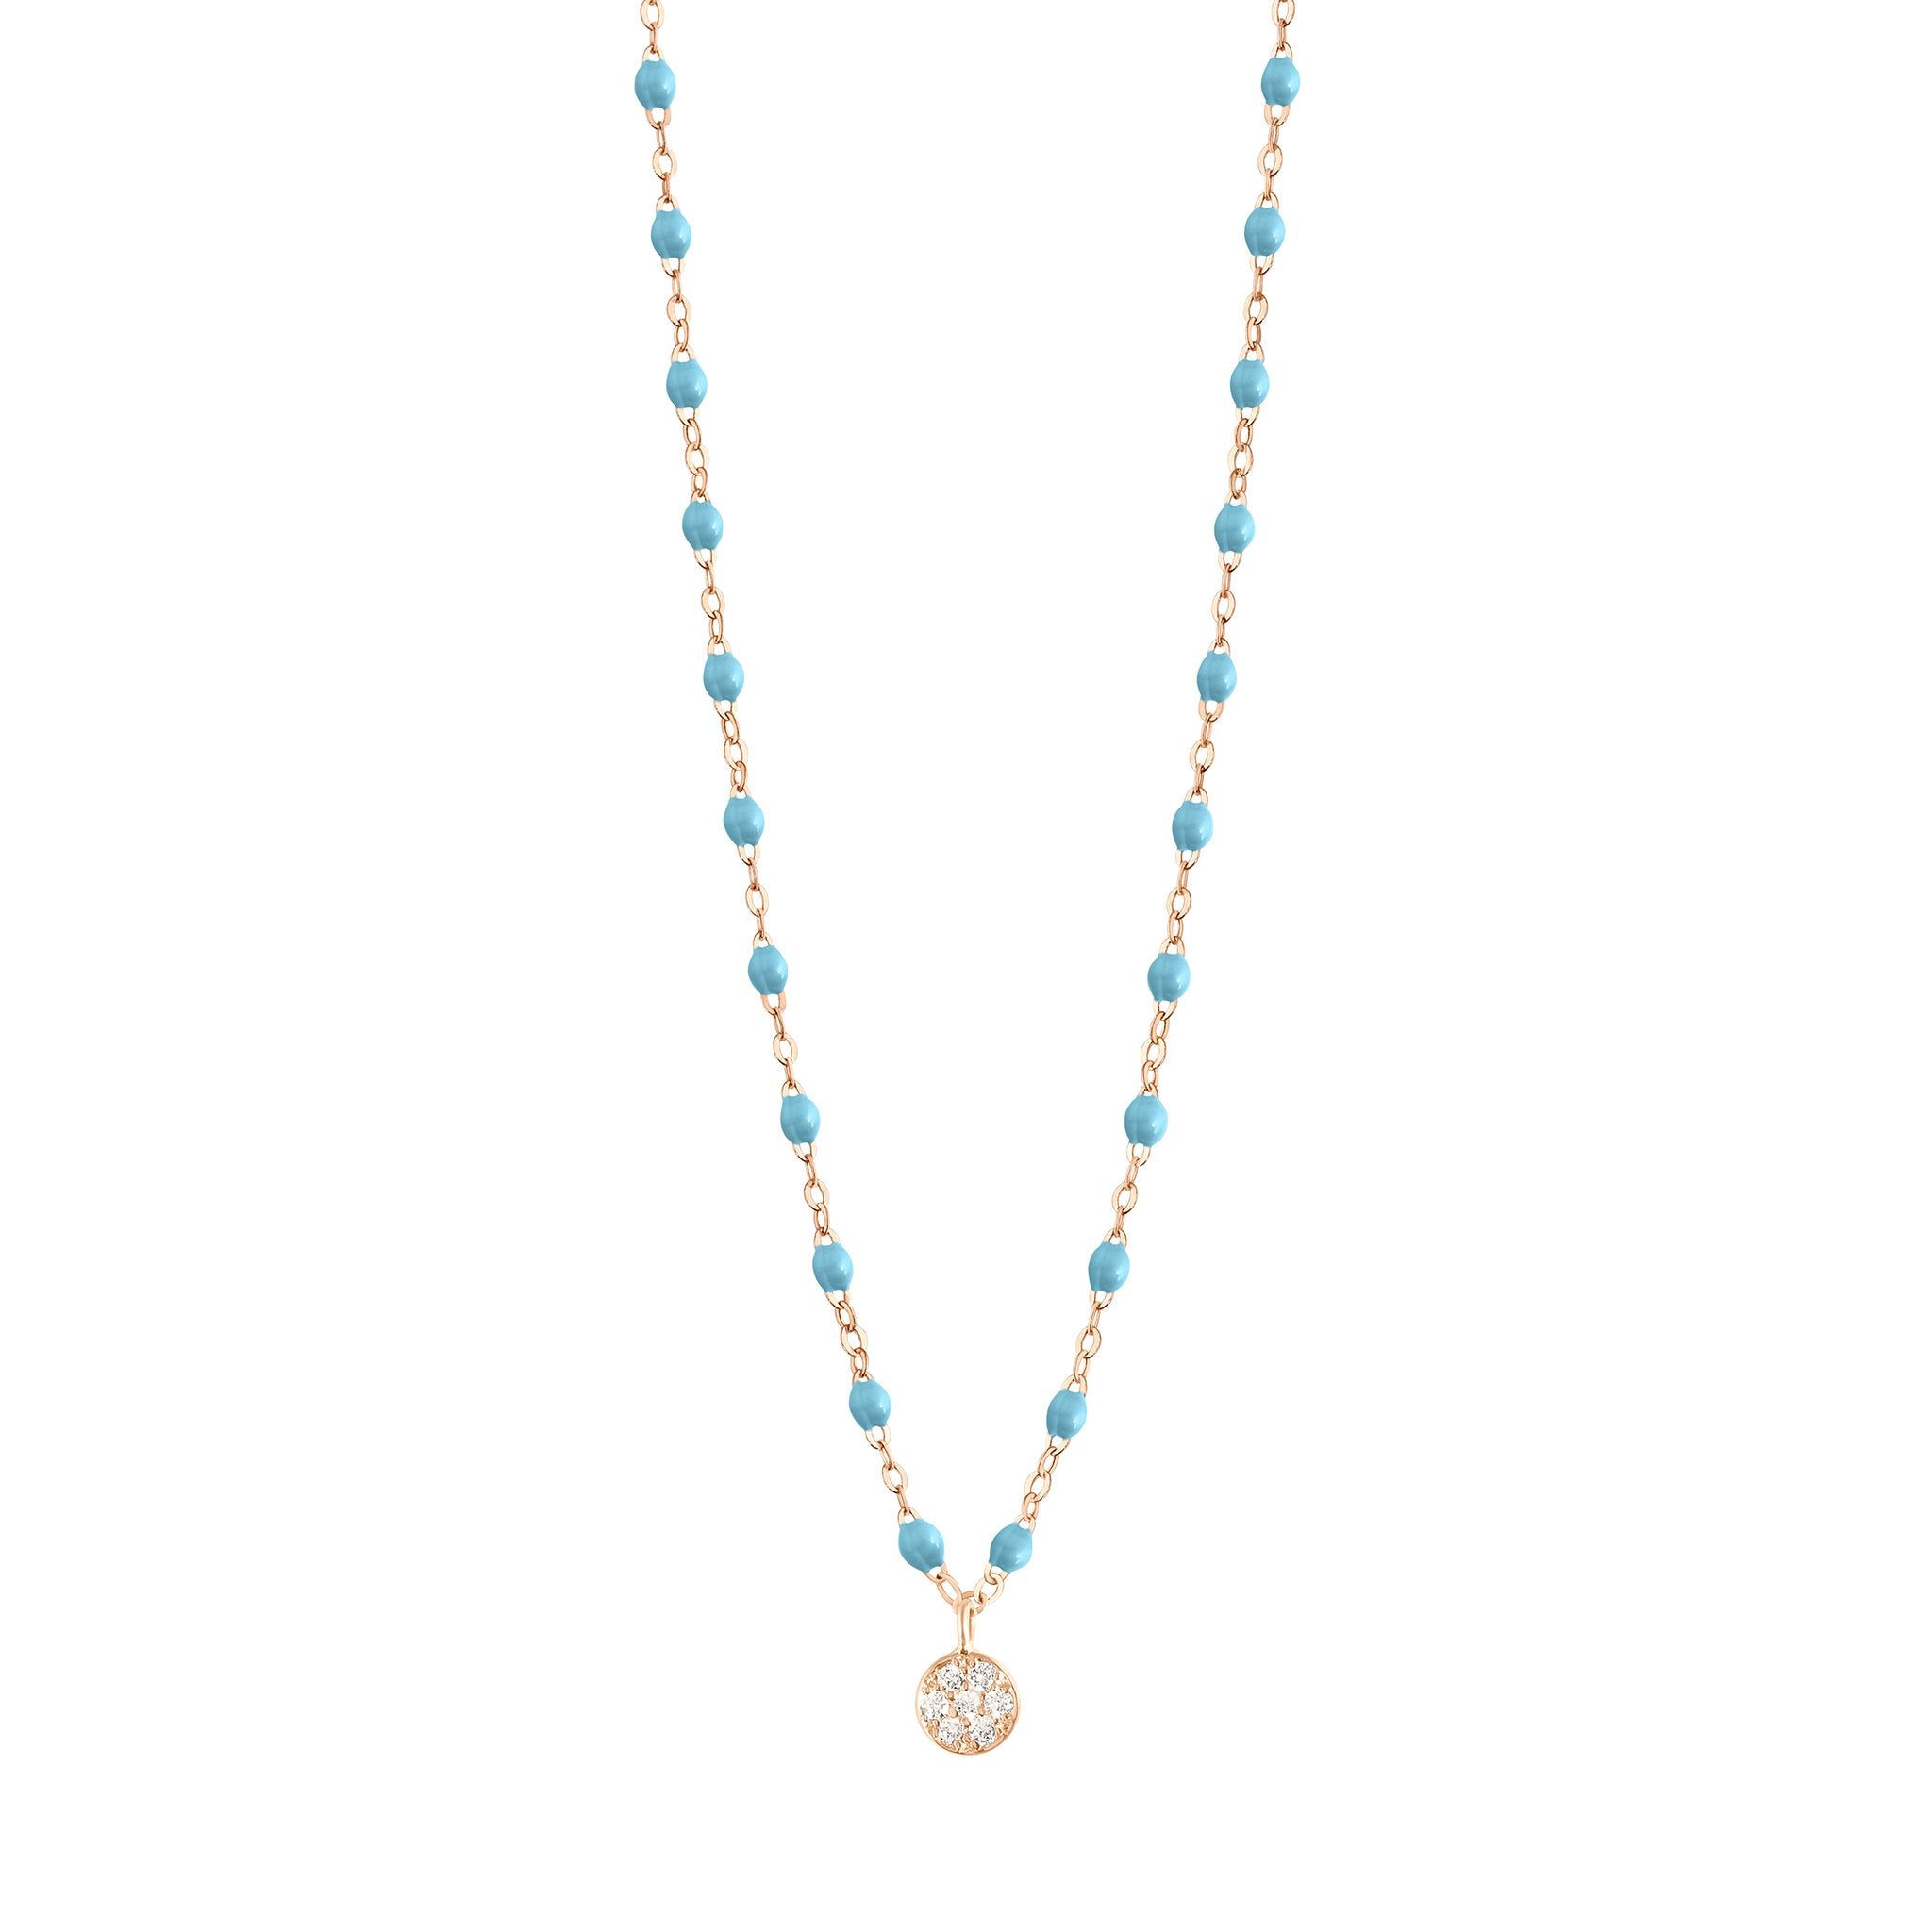 Collier turquoise Puce diamants, or rose, 42 cm pirate Référence :  b1pu002r3442di -1